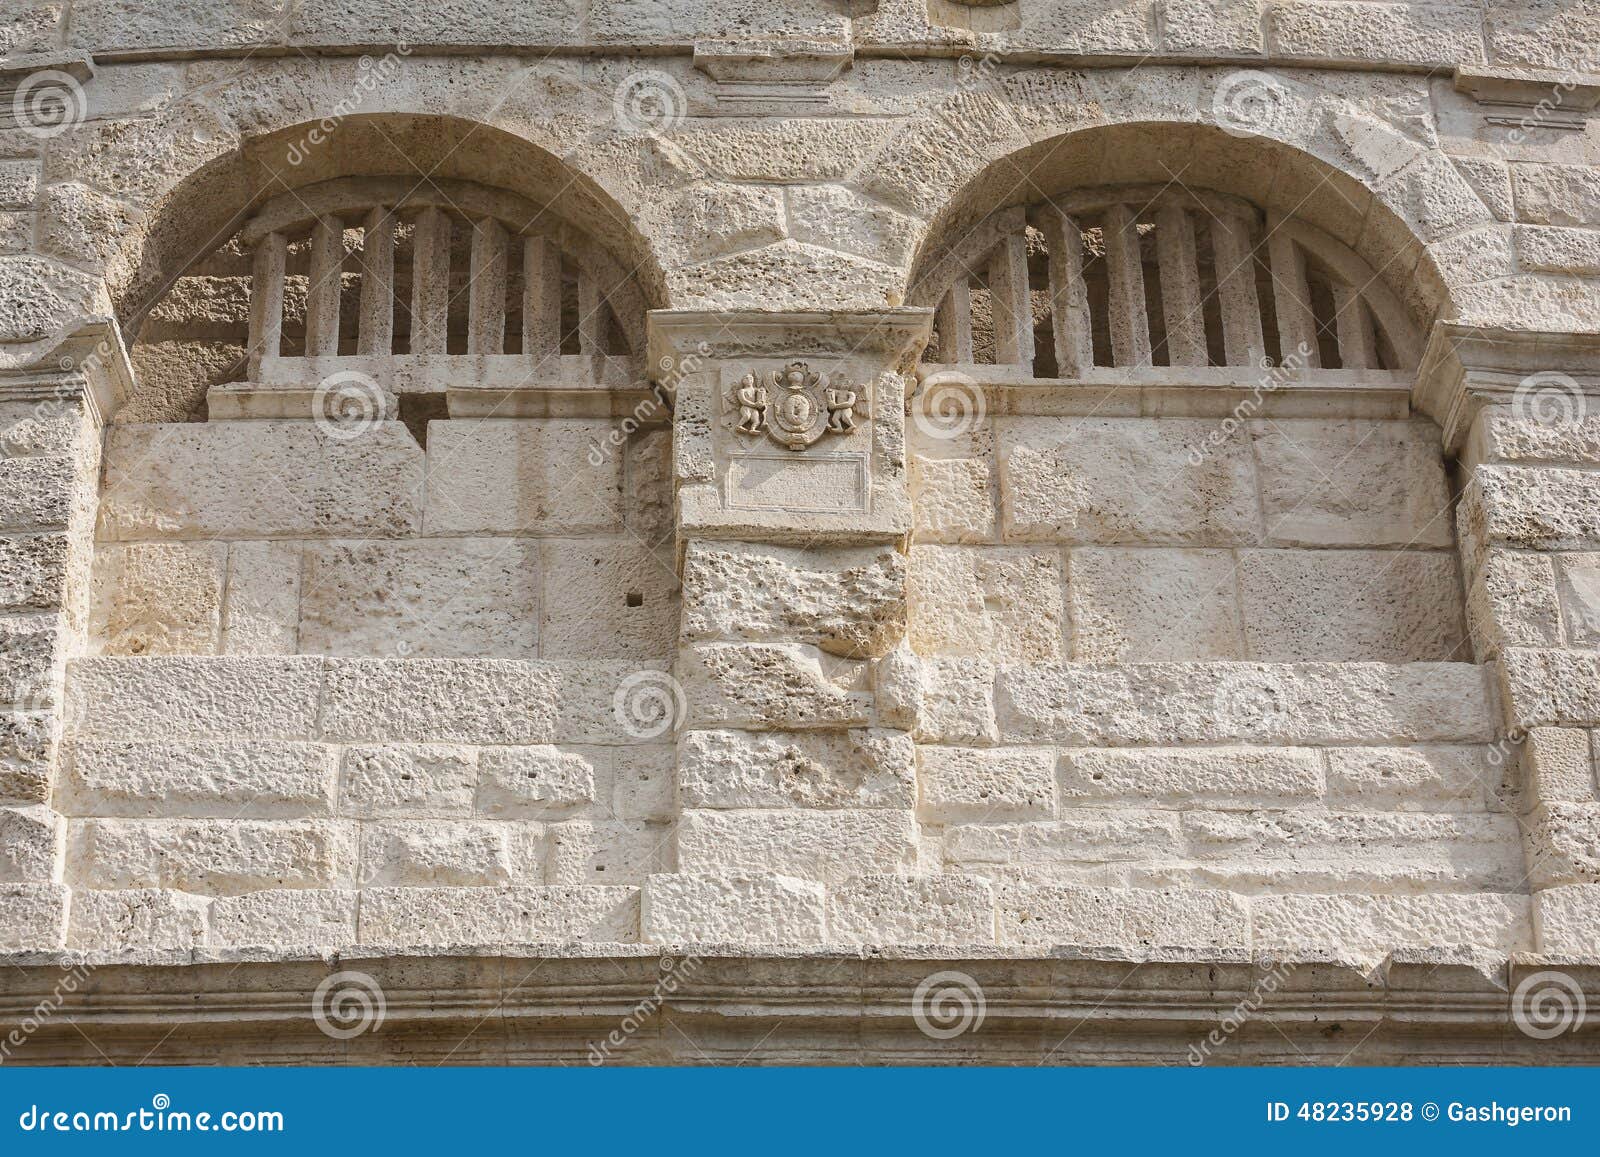 Windows In Ancient Stone Walls Stock Photo Image of 